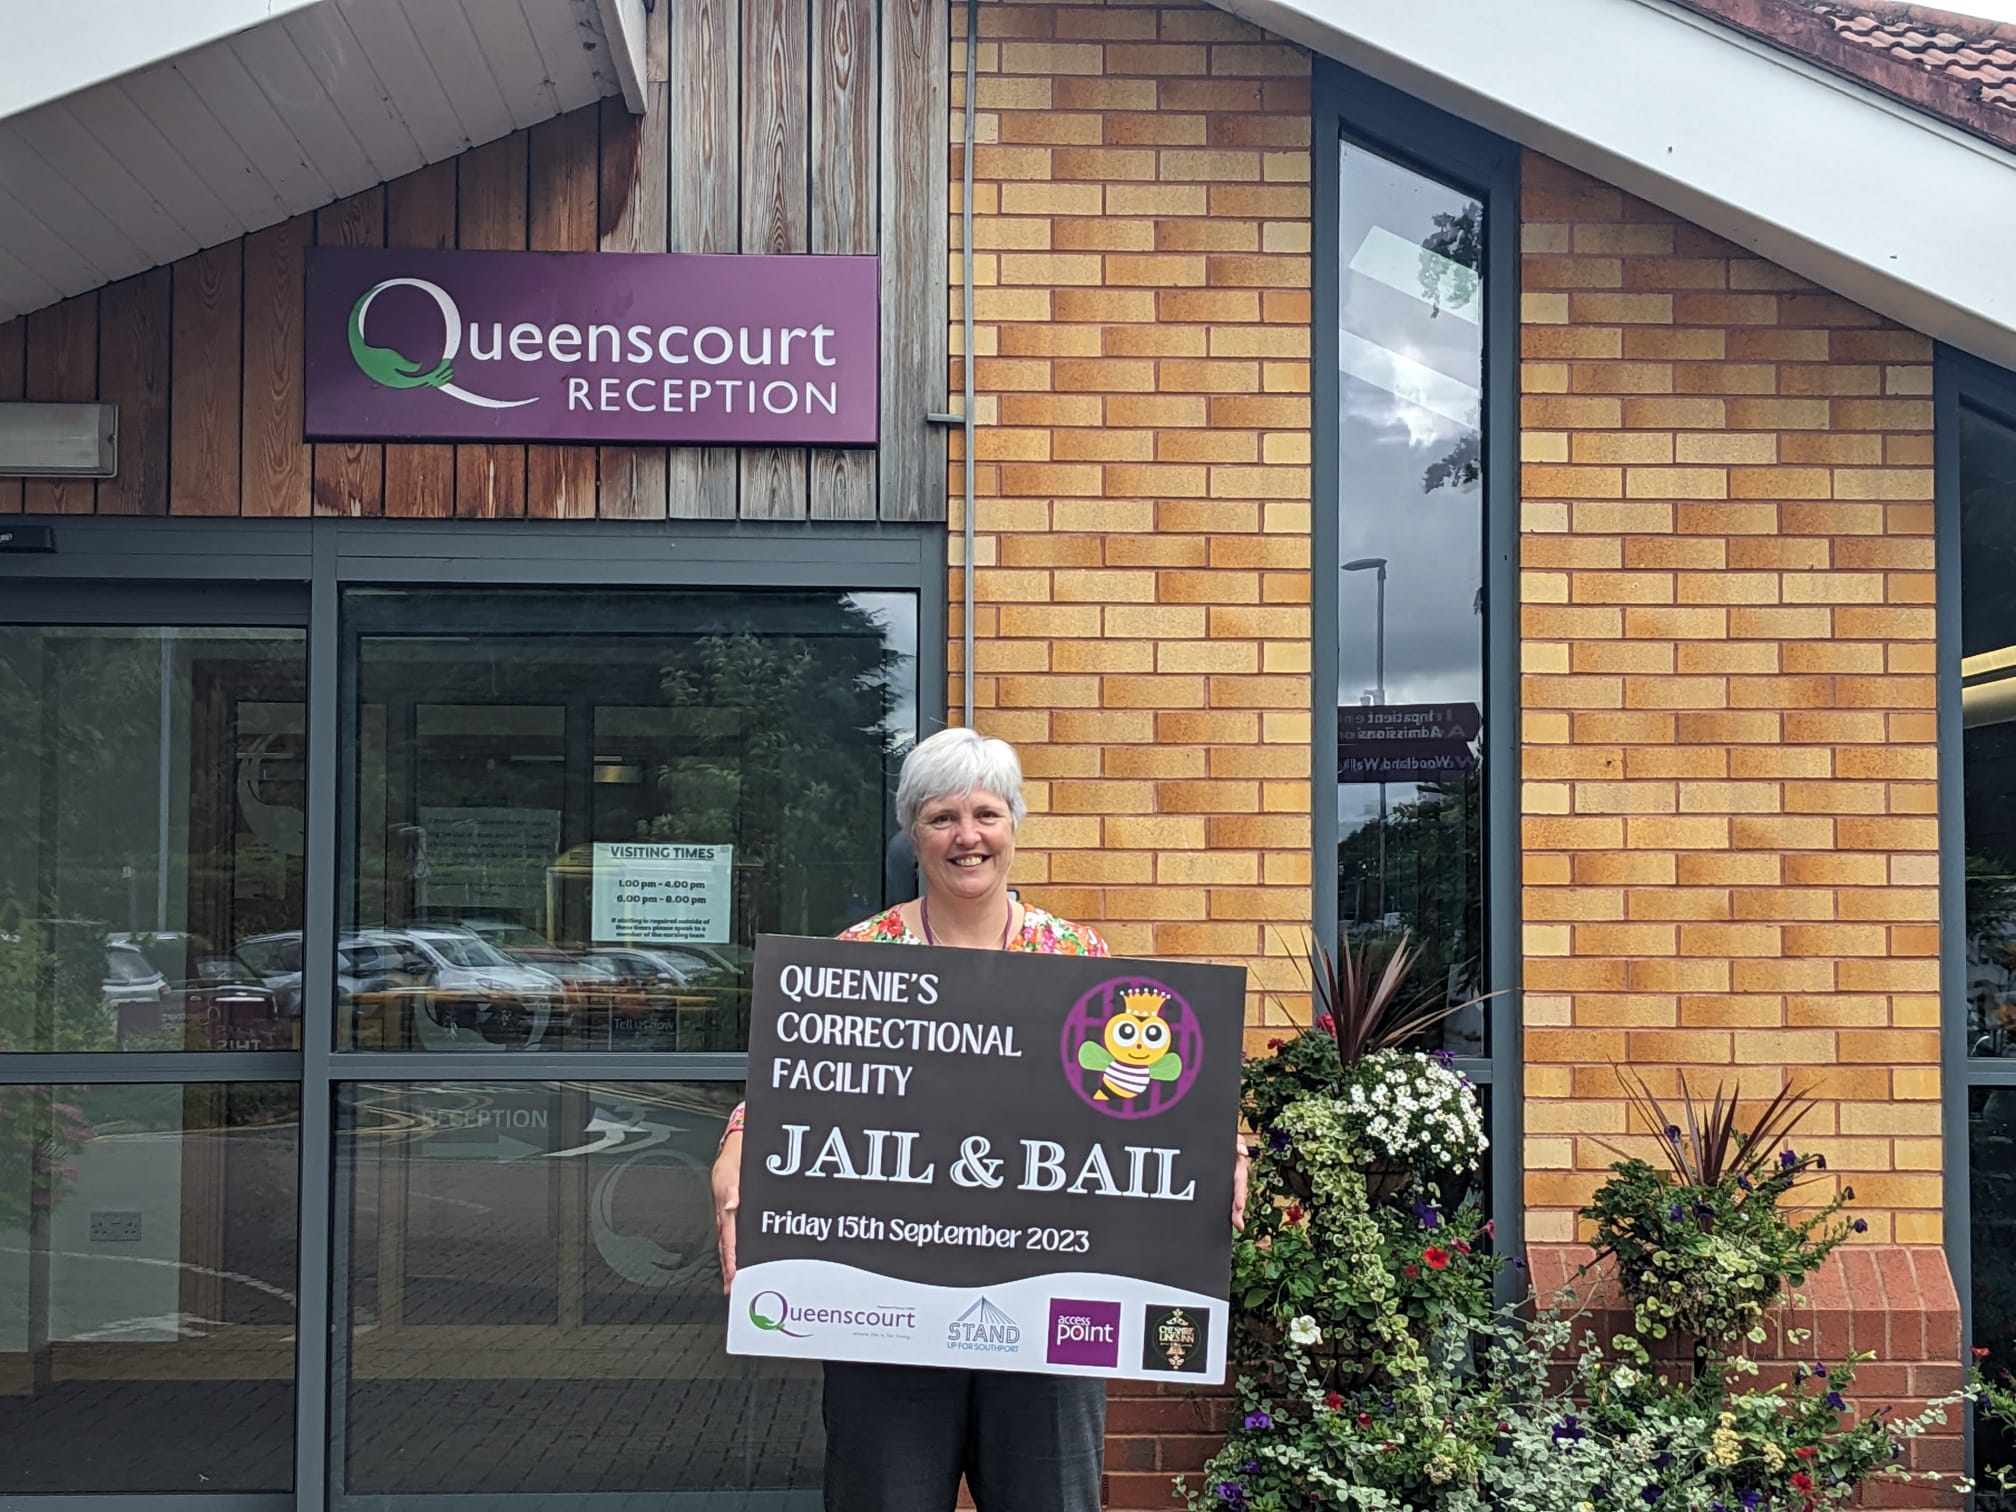 Queenscourt Hospice Director of Corporate Services Debbie Pierce-Lawson is taking part in the Jail & Bail fundraiser to raise funds for the charity